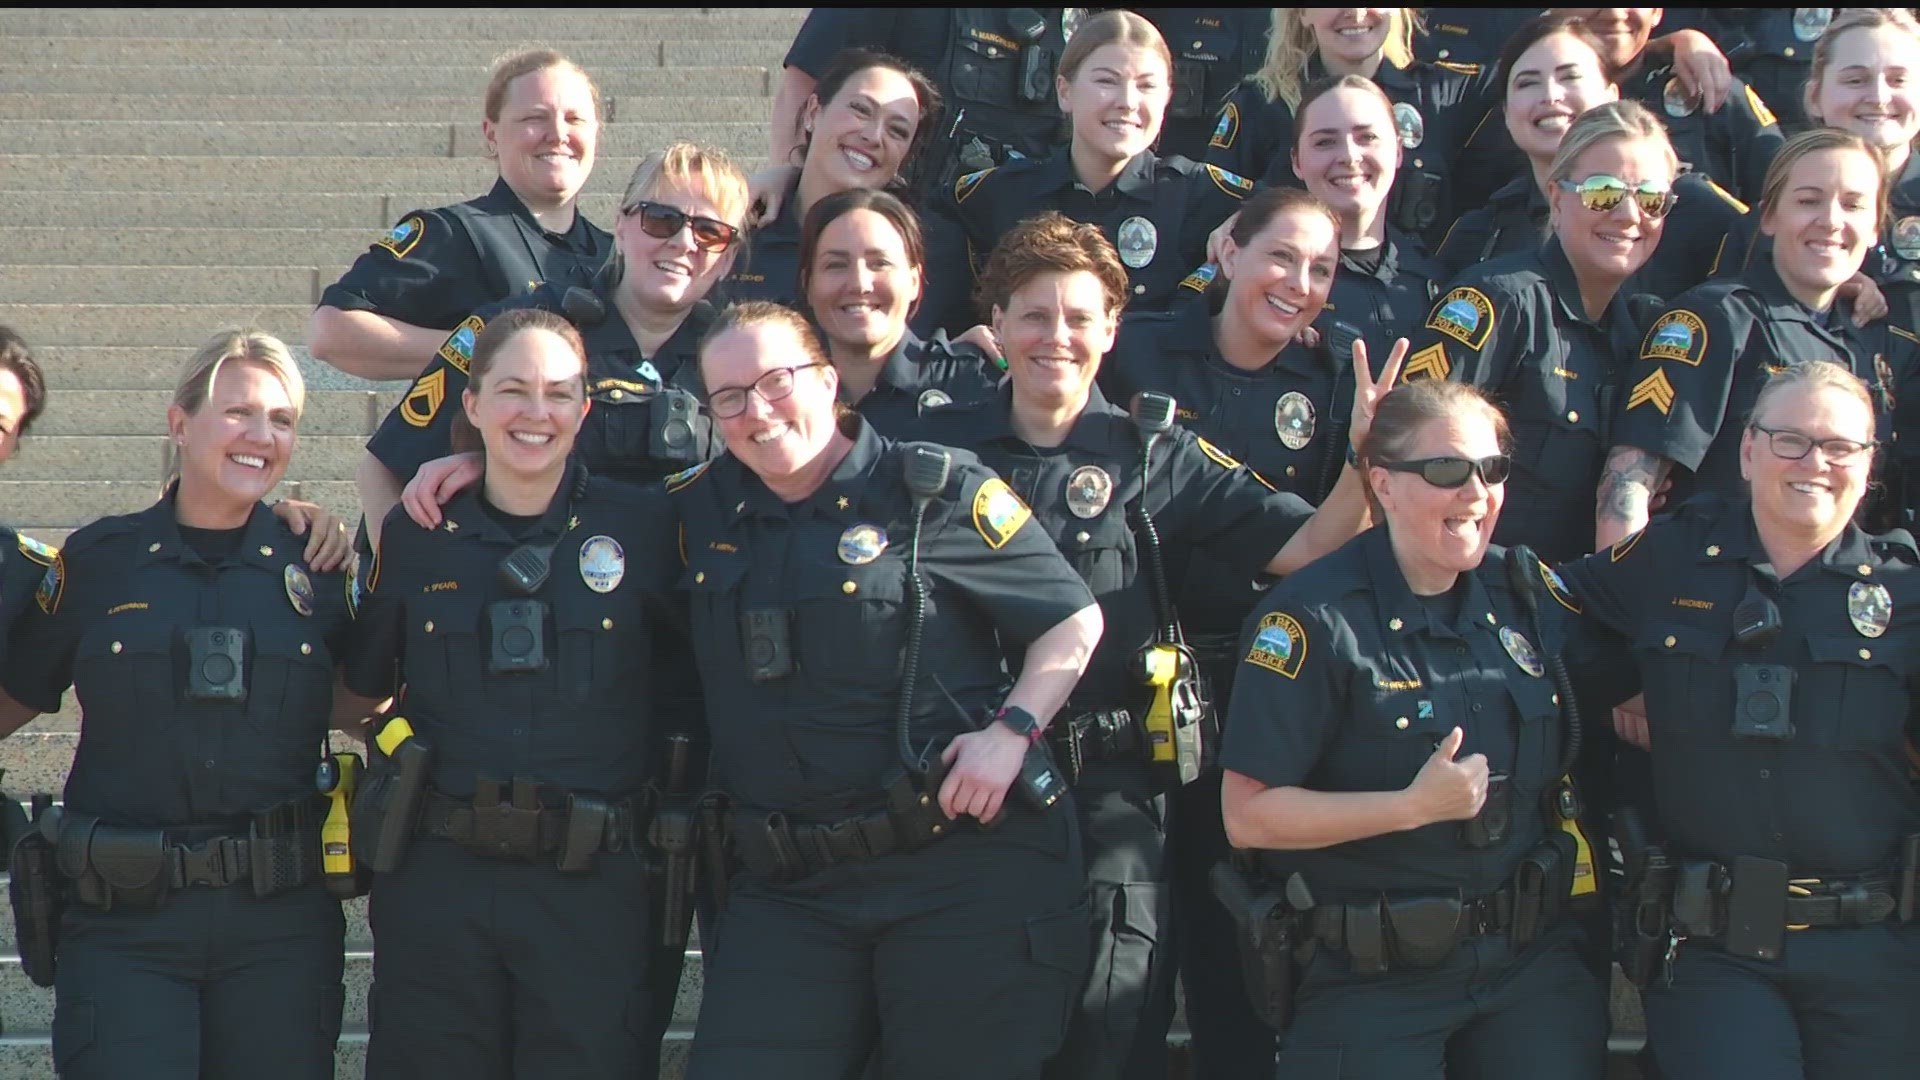 The department is looking to have 30 percent of its force be female officers by the year 2030.